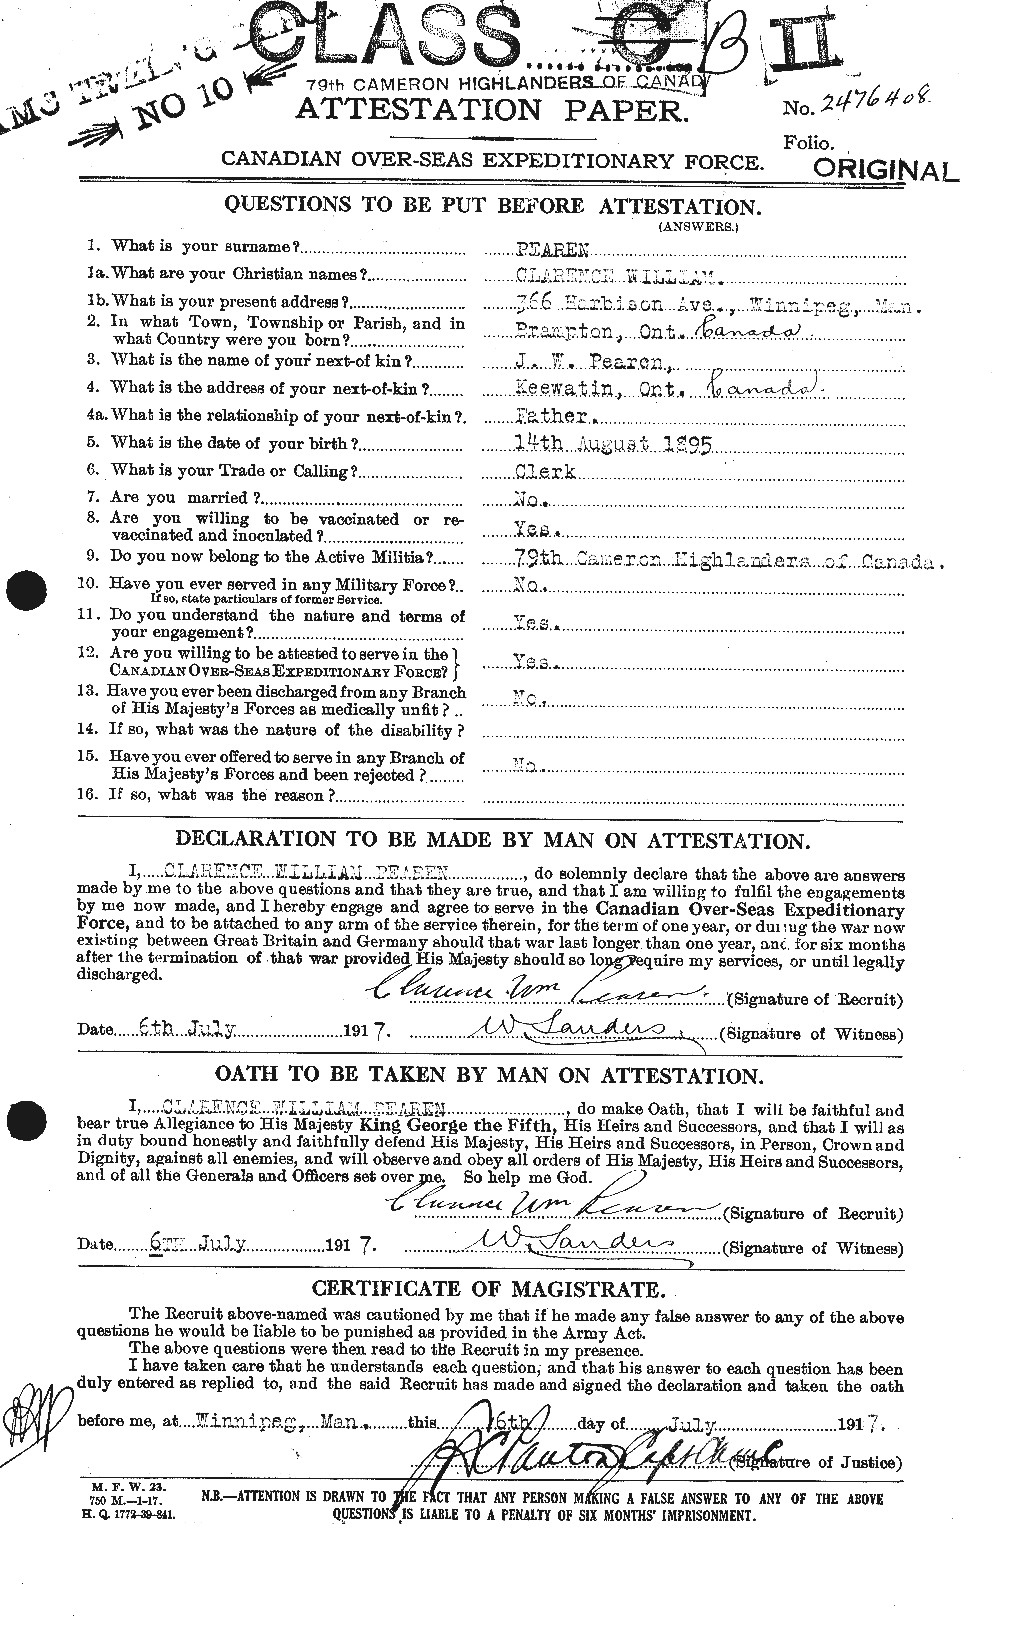 Personnel Records of the First World War - CEF 571432a